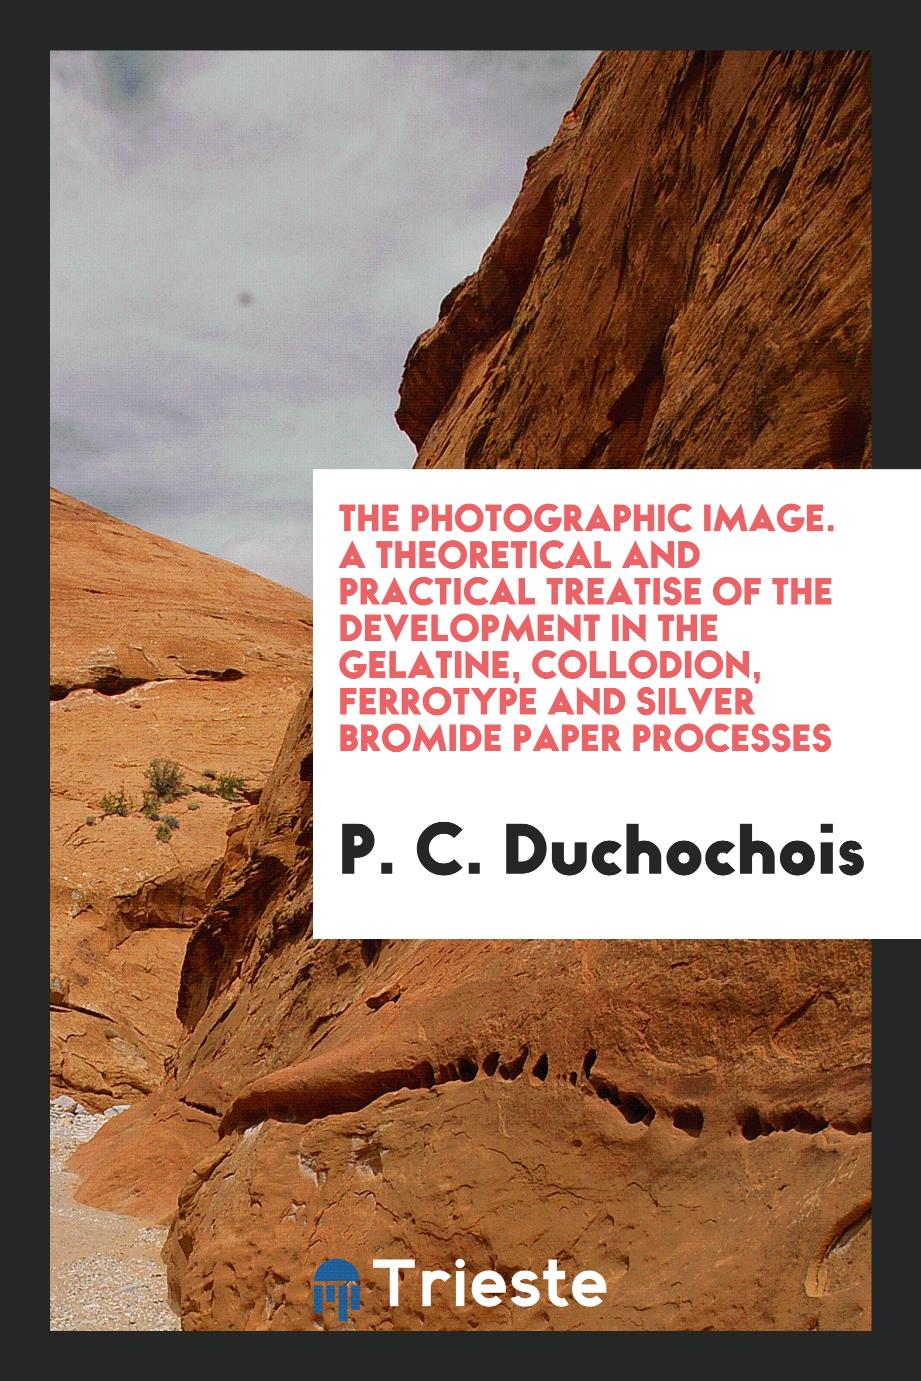 The photographic image. A theoretical and practical treatise of the development in the gelatine, collodion, ferrotype and silver bromide paper processes